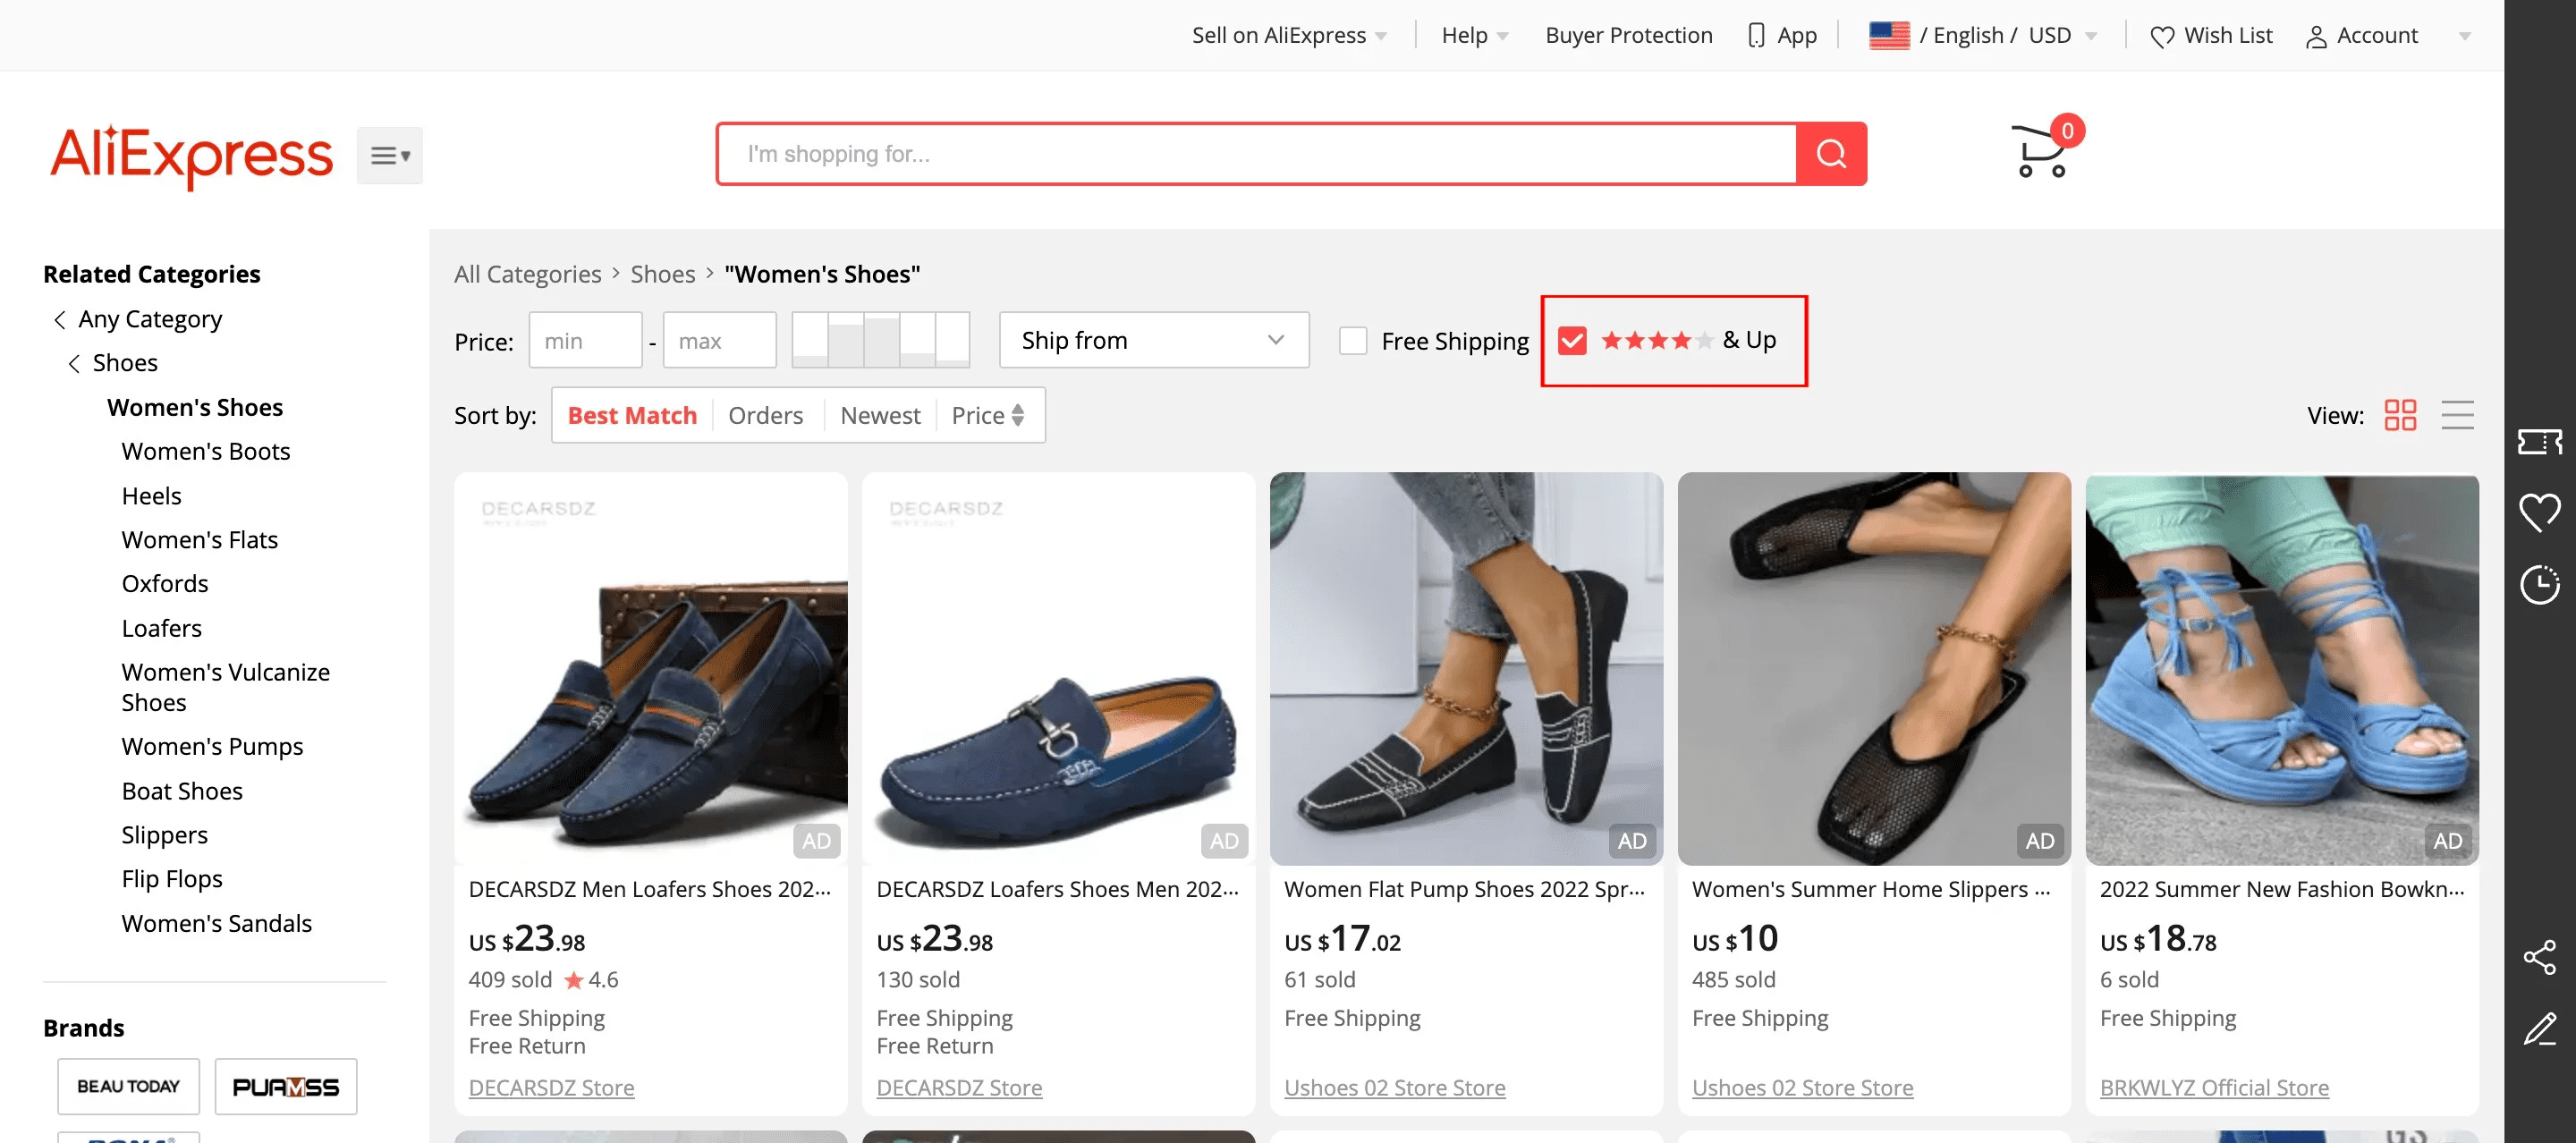 #Trick-7: Filter and search for star rated product listings